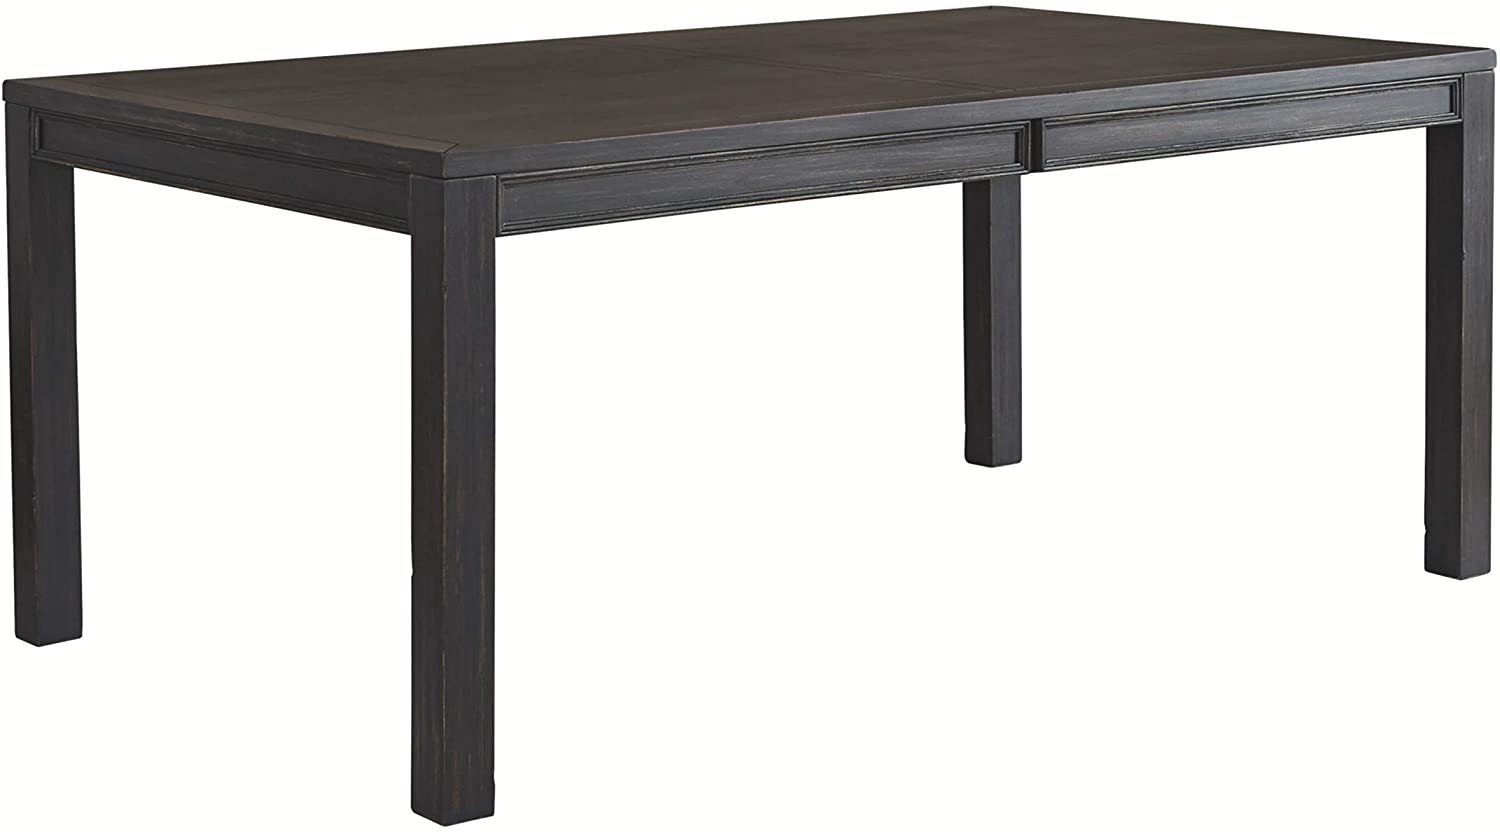 Signature Design by Ashley Jeanette Modern Rectangular Distressed Dining Table, - $638.99